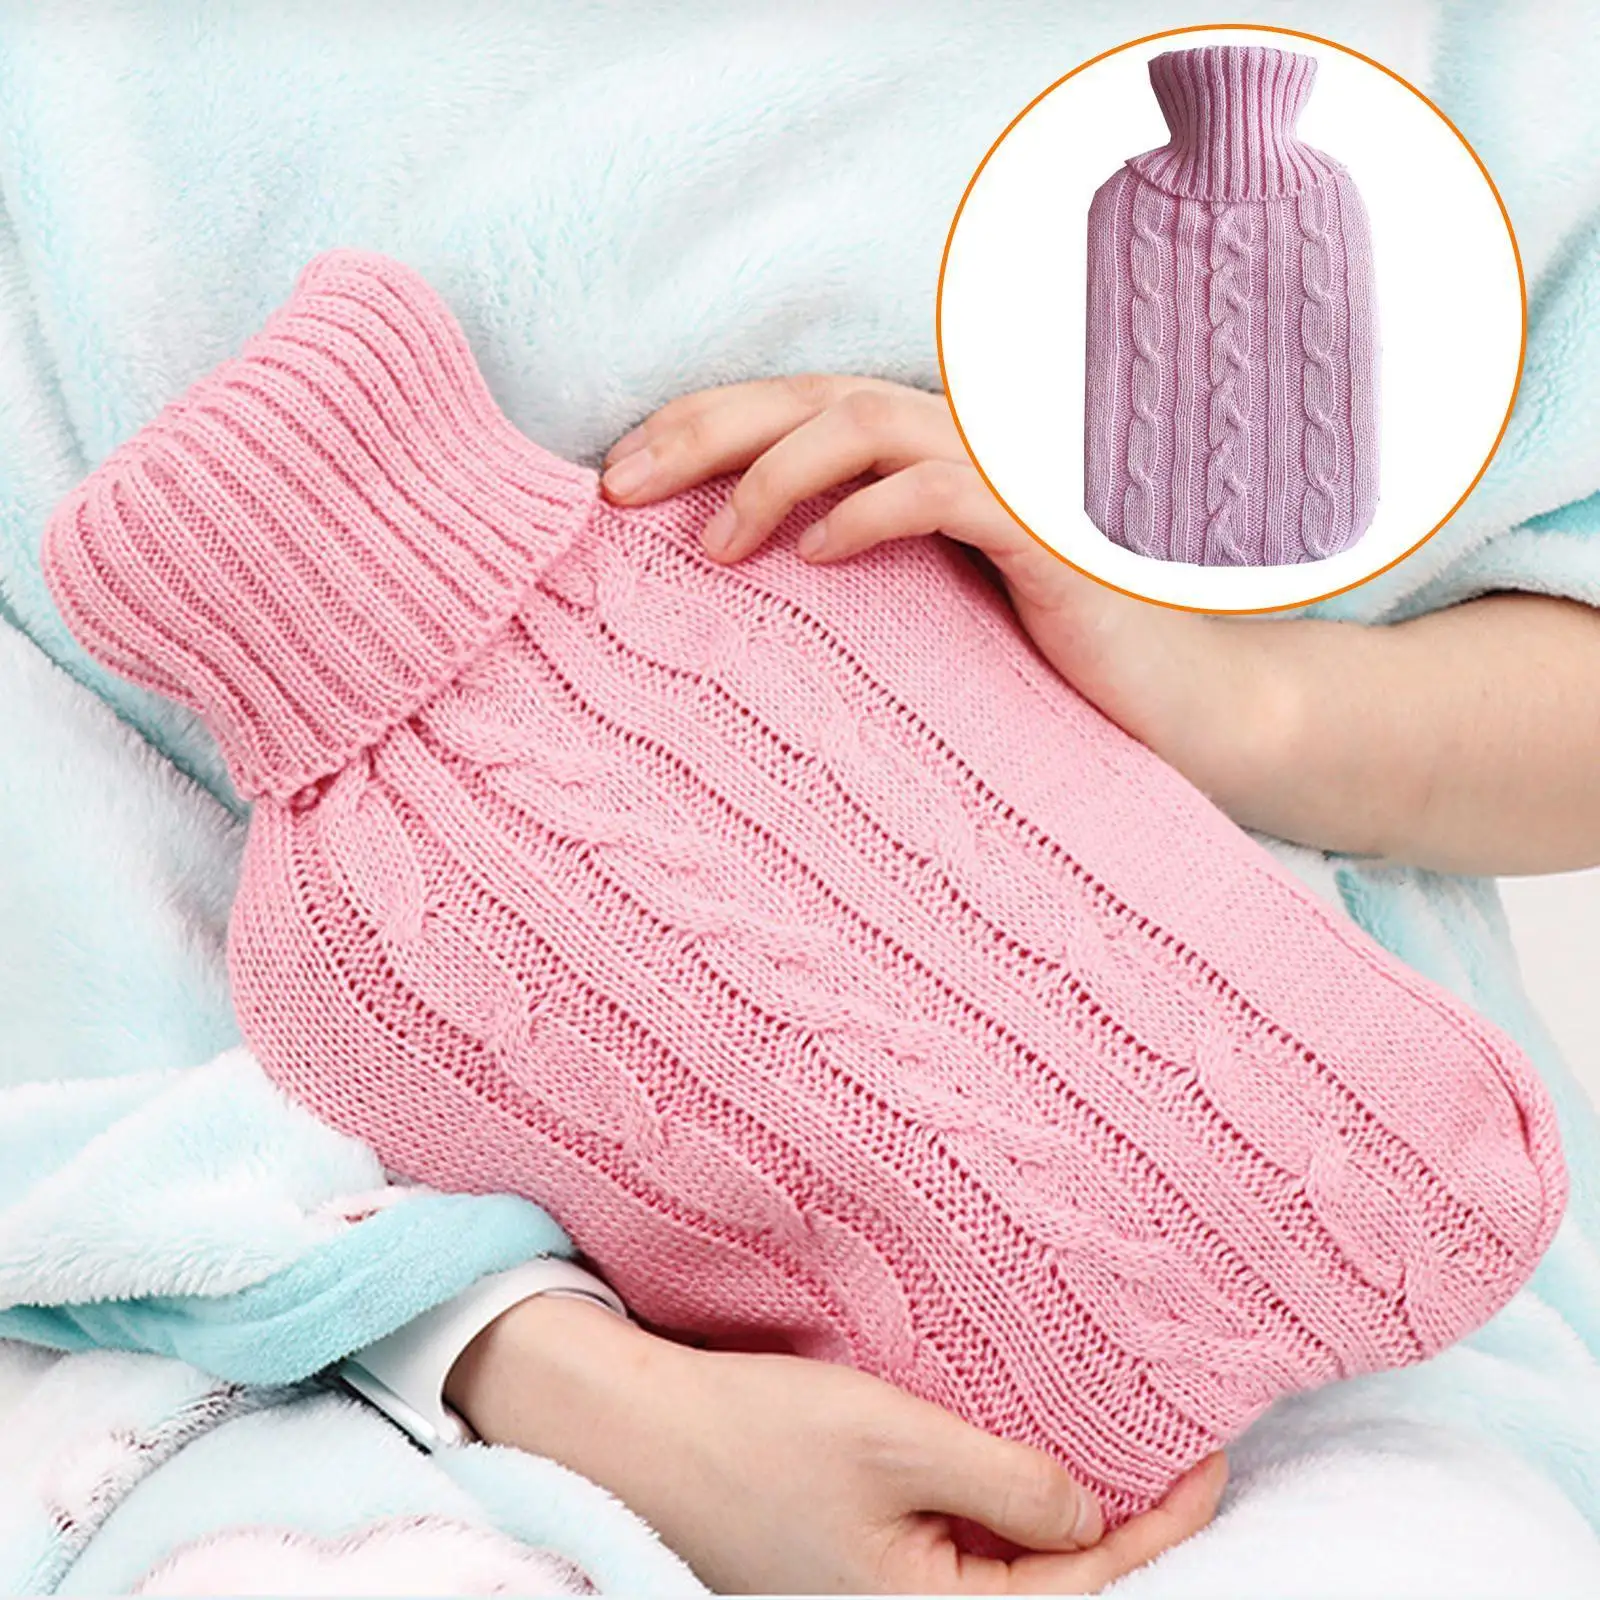 

Hot Water Bottle Knitted Cover, Removable Knitted Protective Cover For Hot Water Bag 2L Therapy Heating Pad Warming Pain Re K6Q9